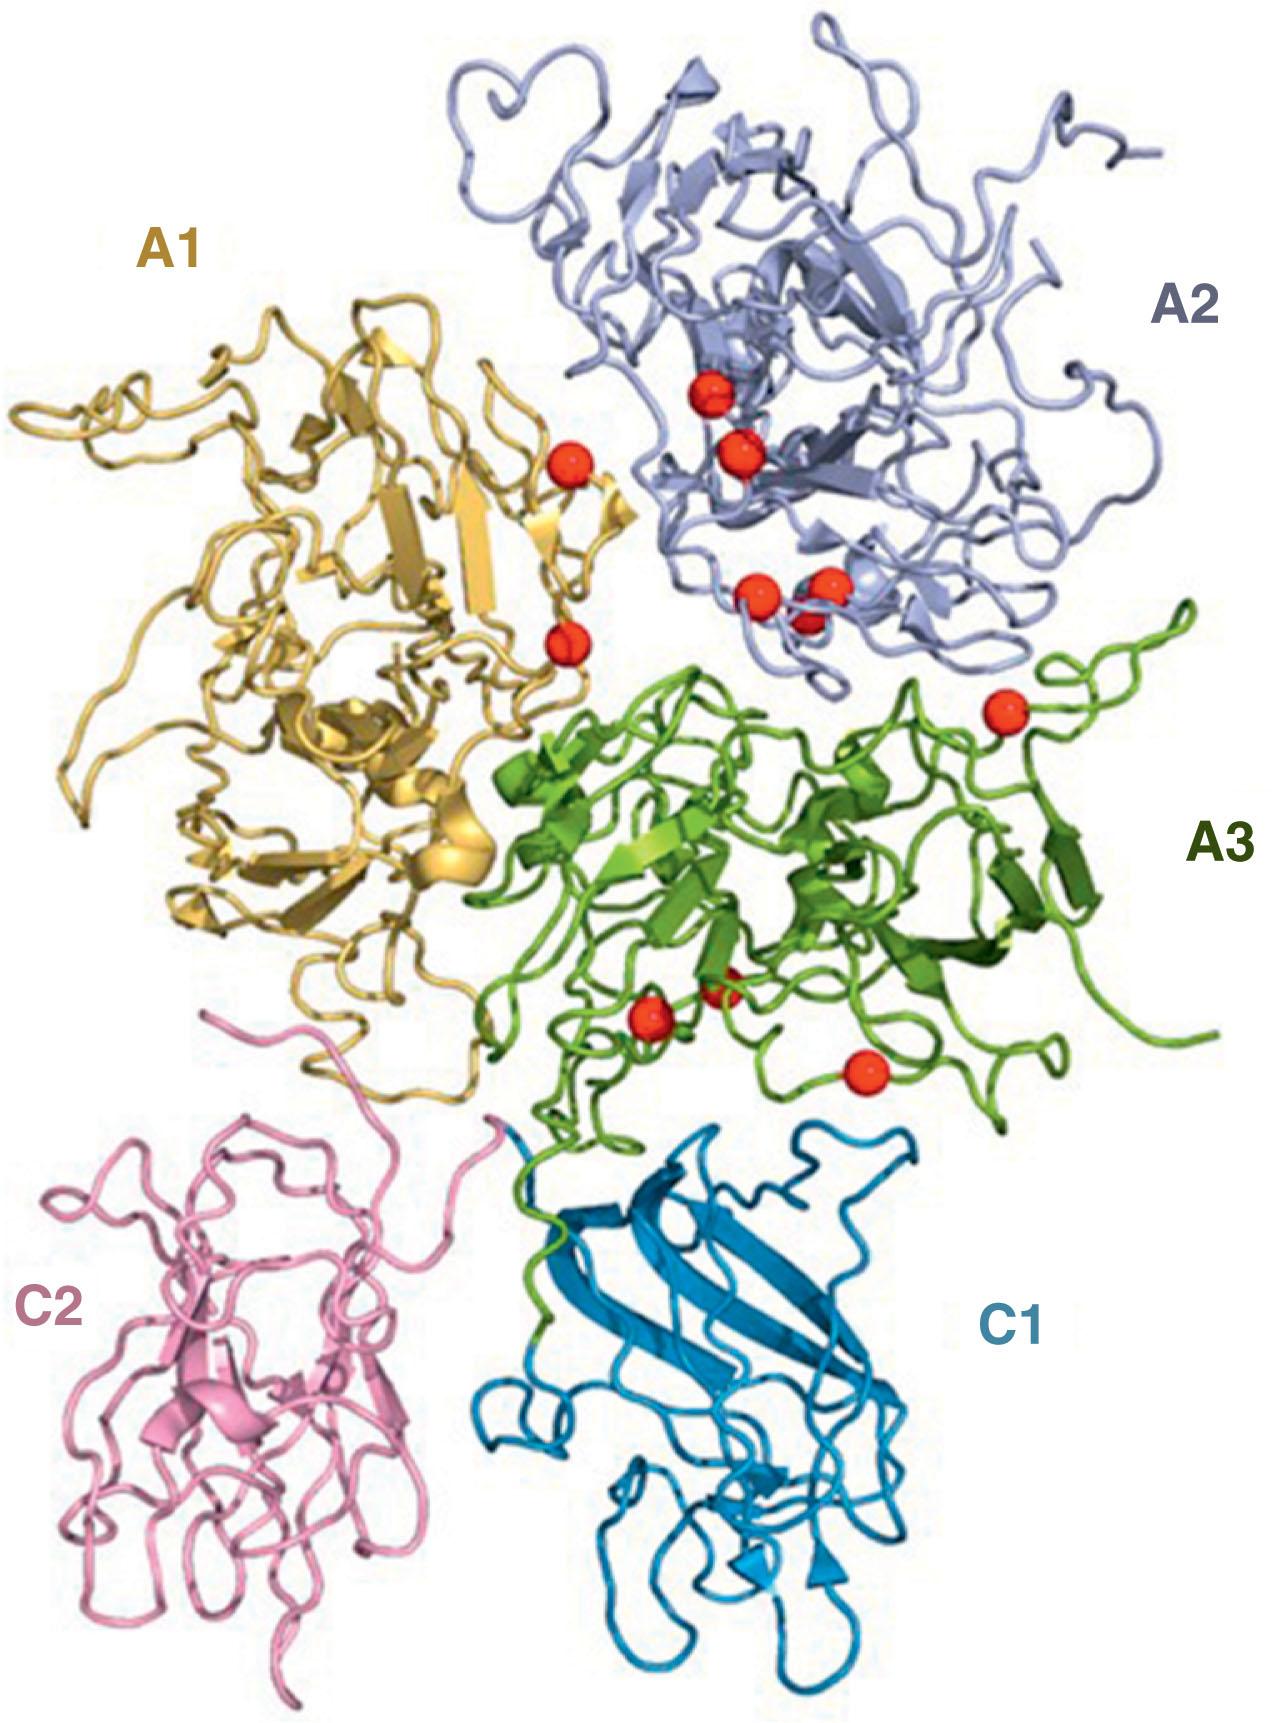 Figure 134.7, RIBBON REPRESENTATION OF THE STRUCTURE OF B-DOMAIN DELETED FACTOR VIII (FVIII).